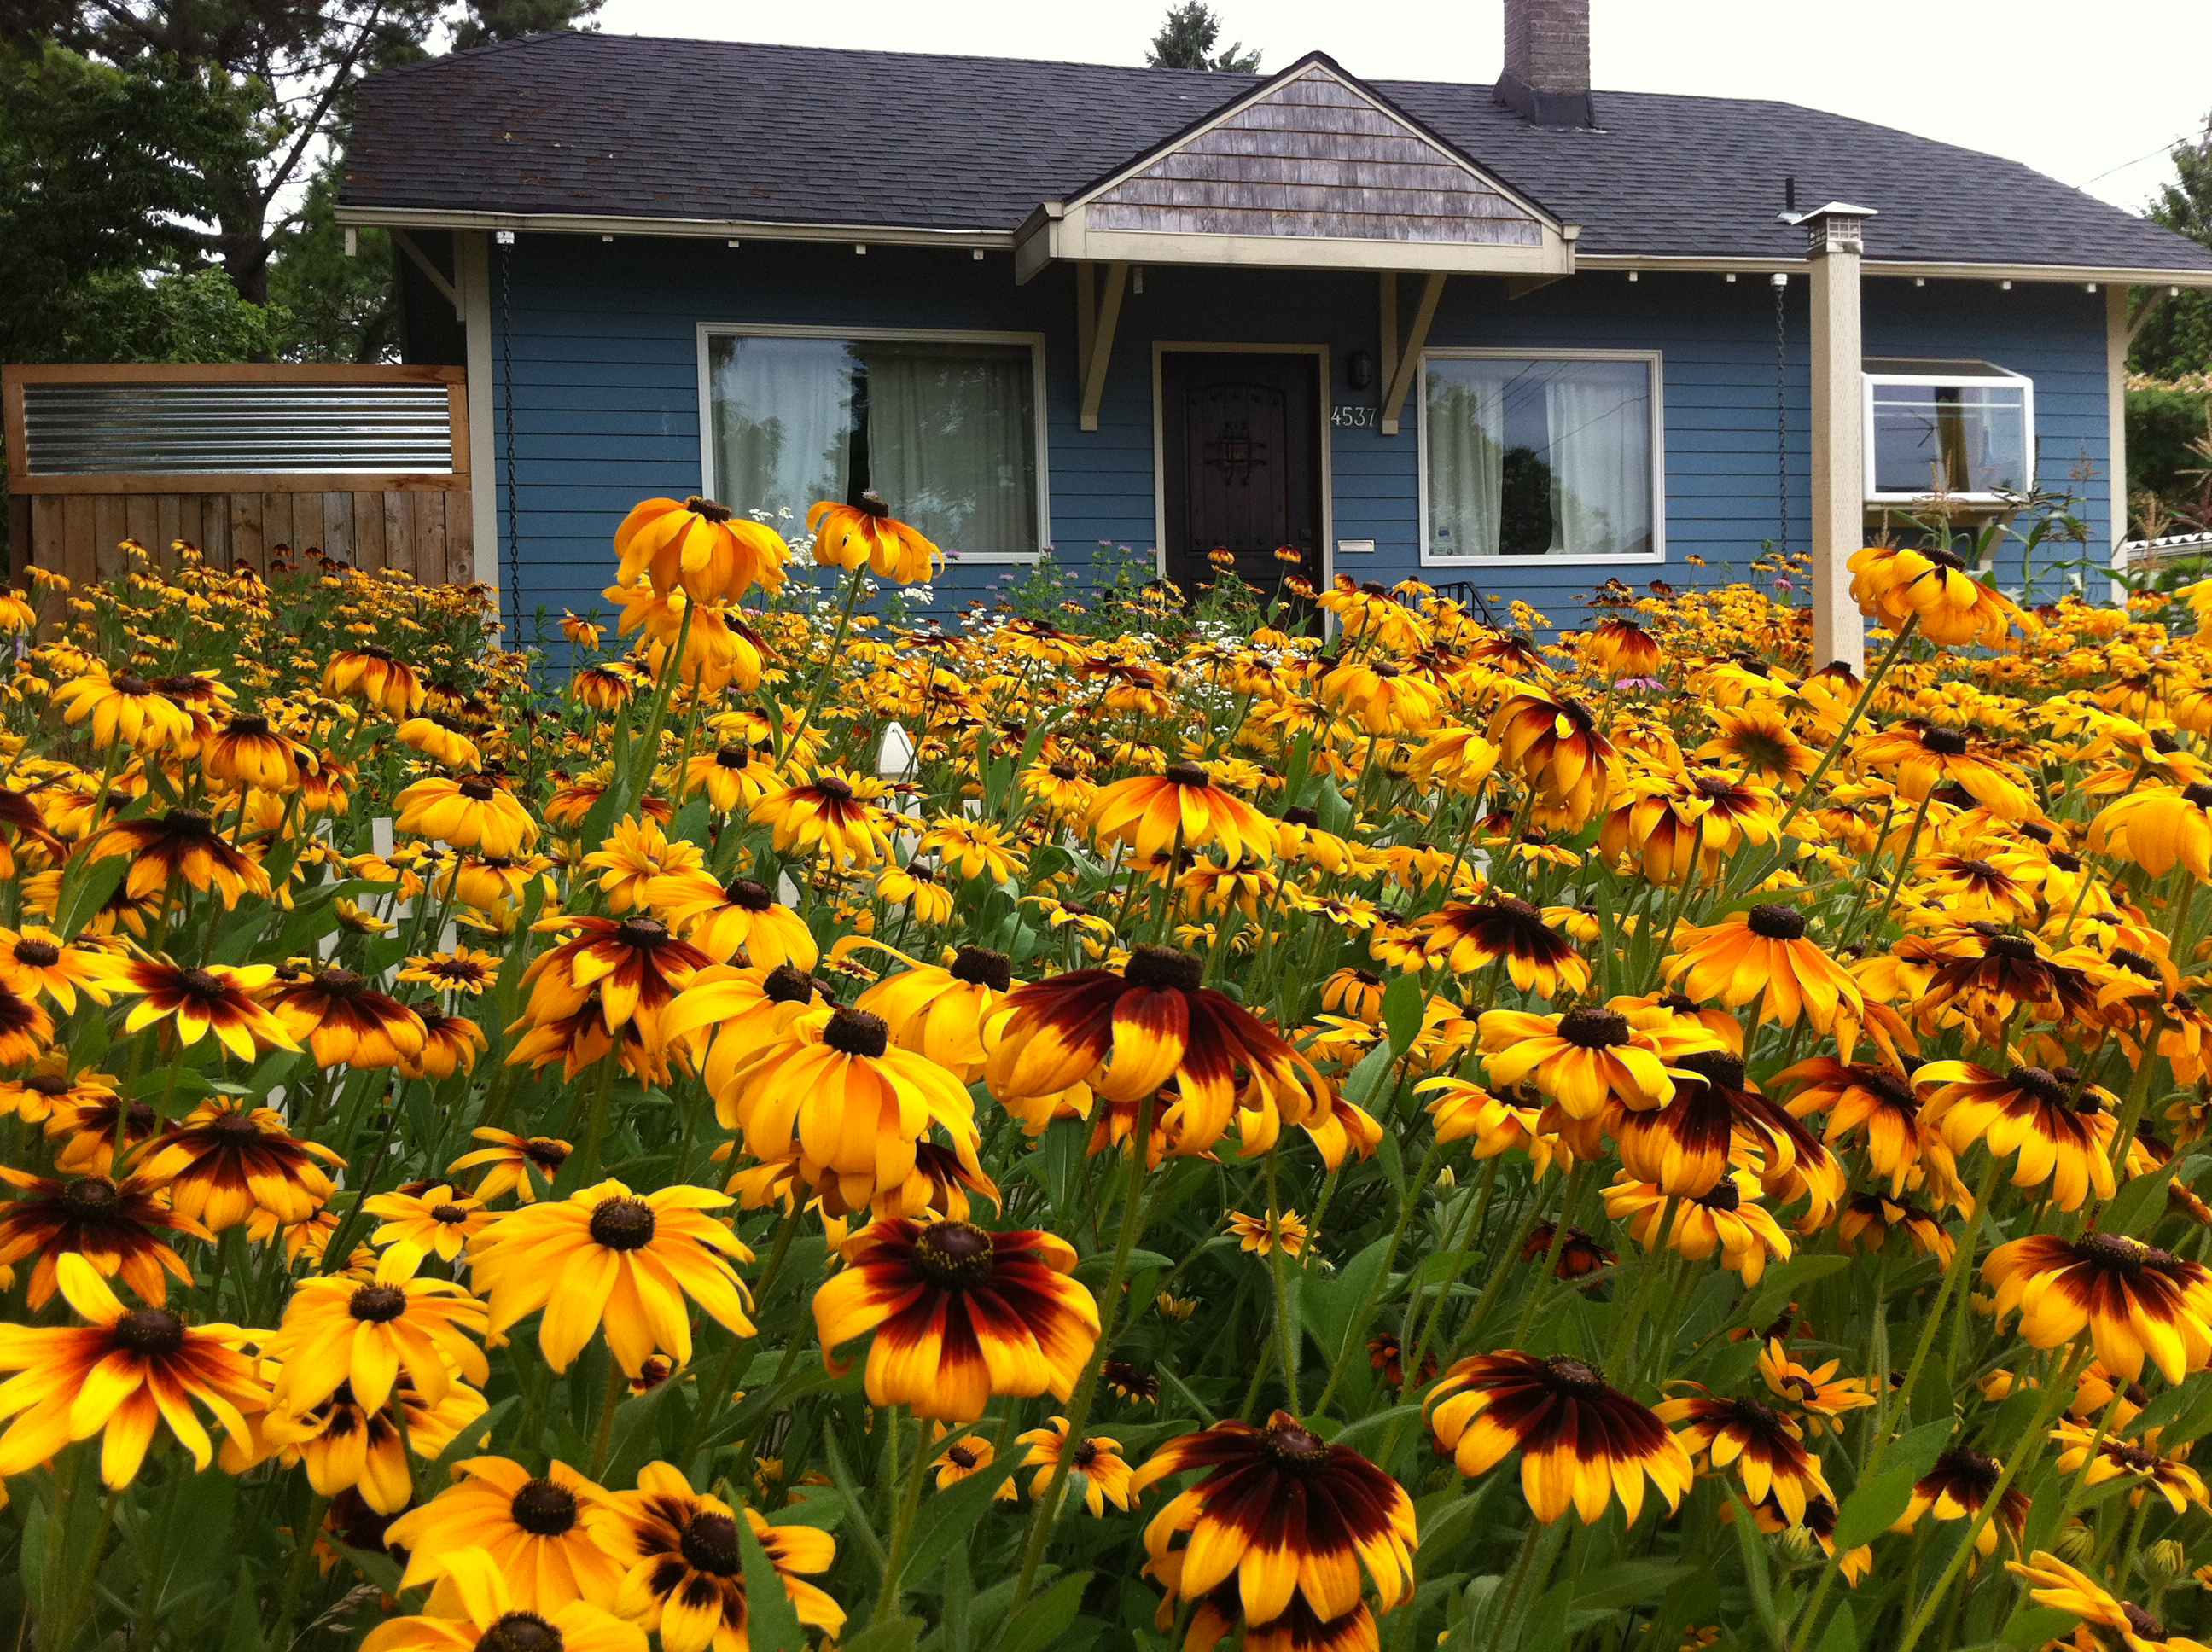 A mass of yellow coneflowers fill the front garden of this house. The color contrasts with the blue walls.